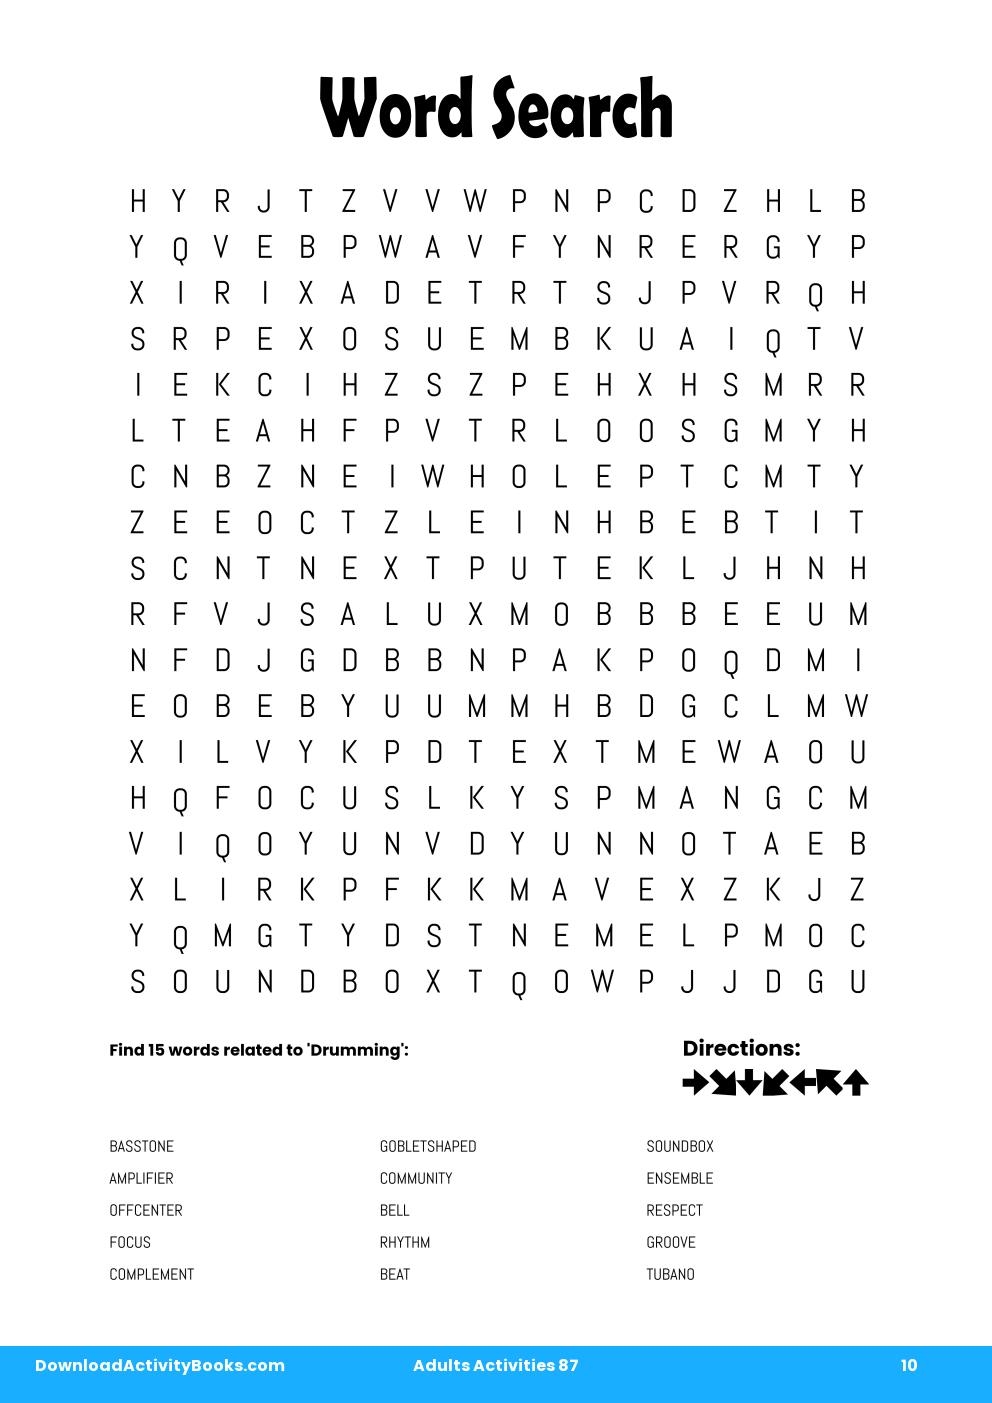 Word Search in Adults Activities 87